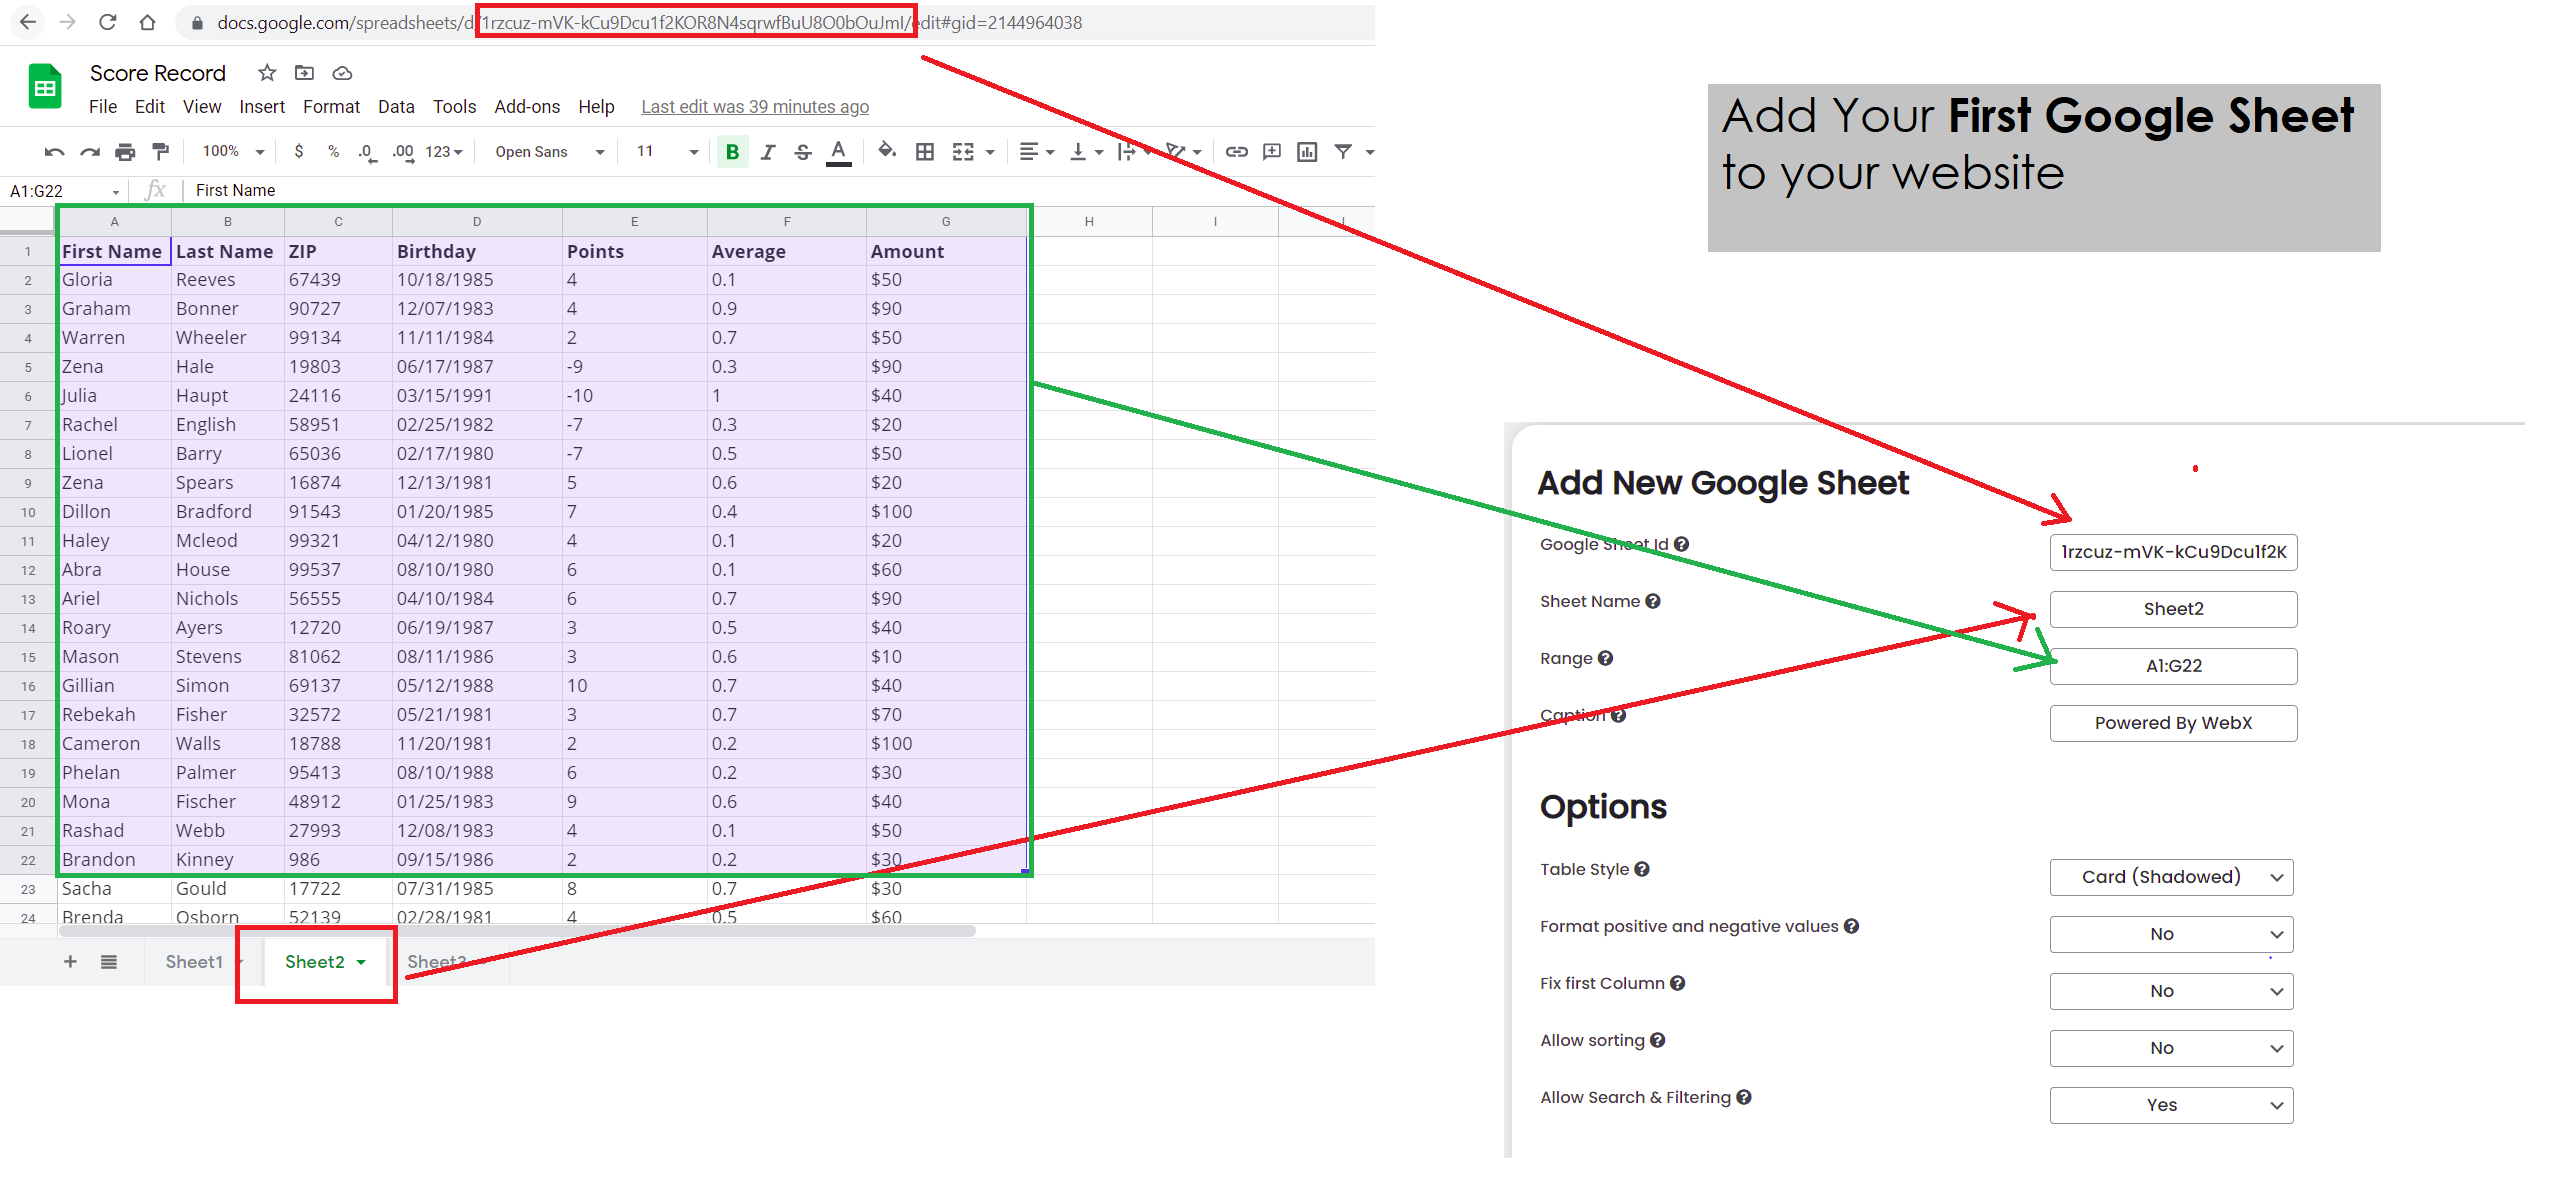 Connect your google sheet and manage options: Sorting, filtering, exporting data to other formats